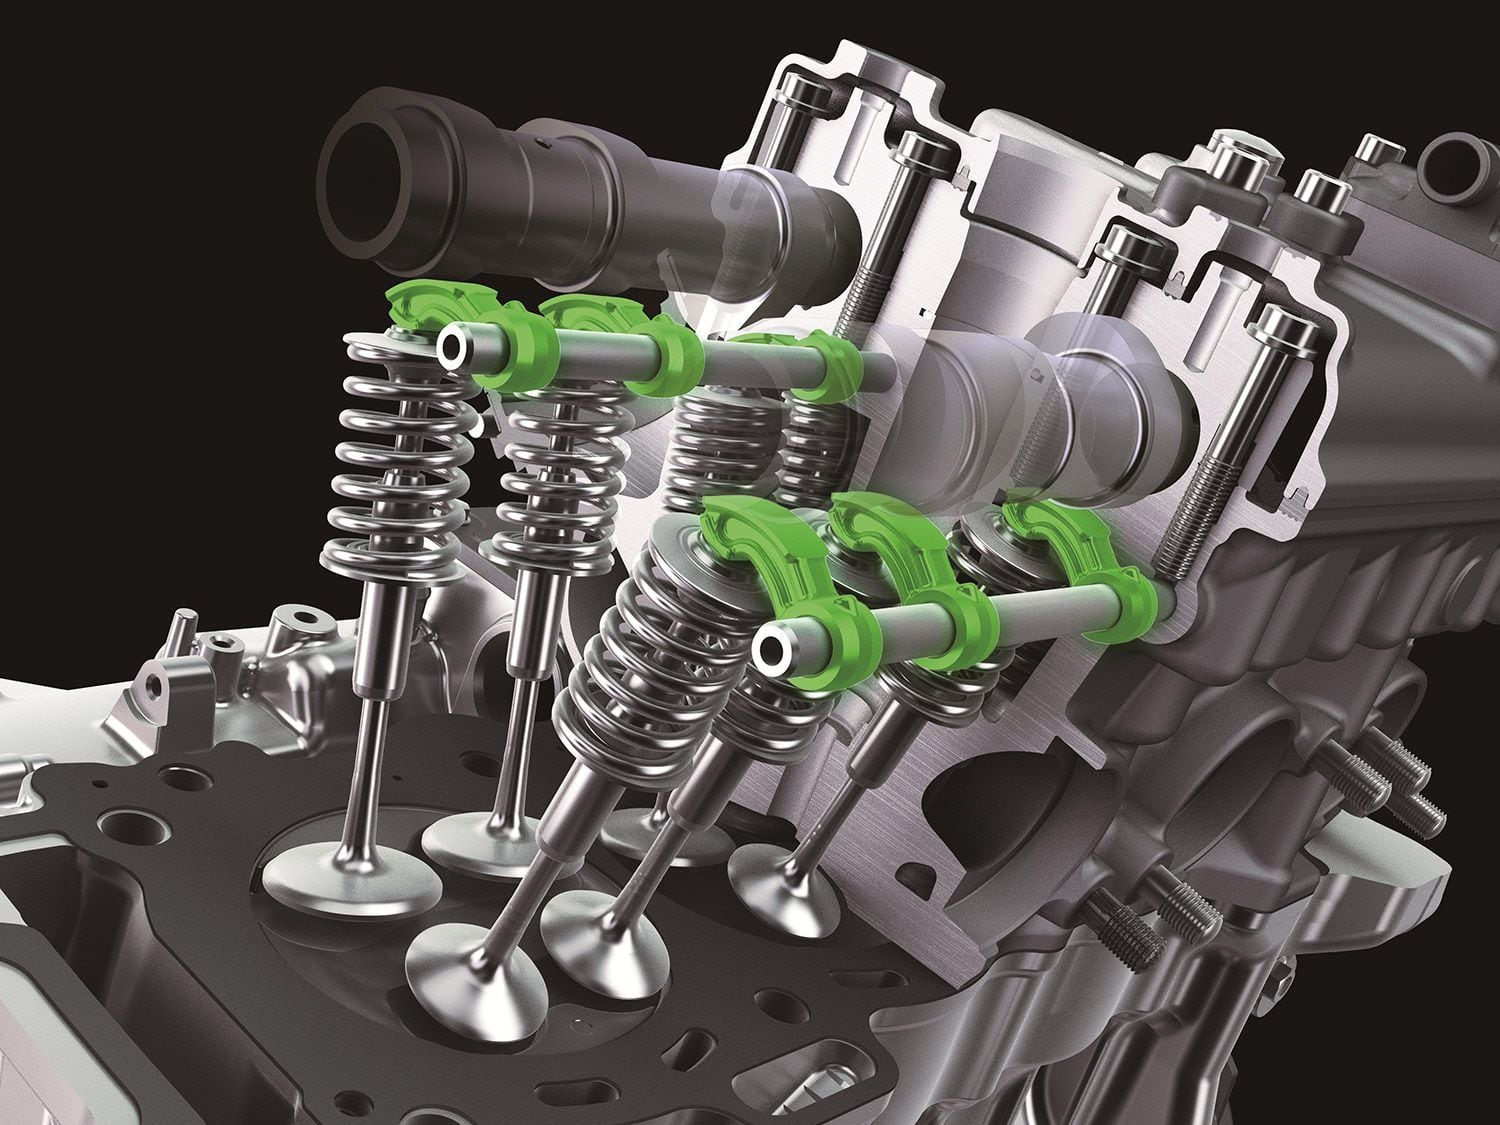 A look inside Kawasaki’s ZX-10R engine illustrates the use of finger followers, which reduce weight allowing higher revs.